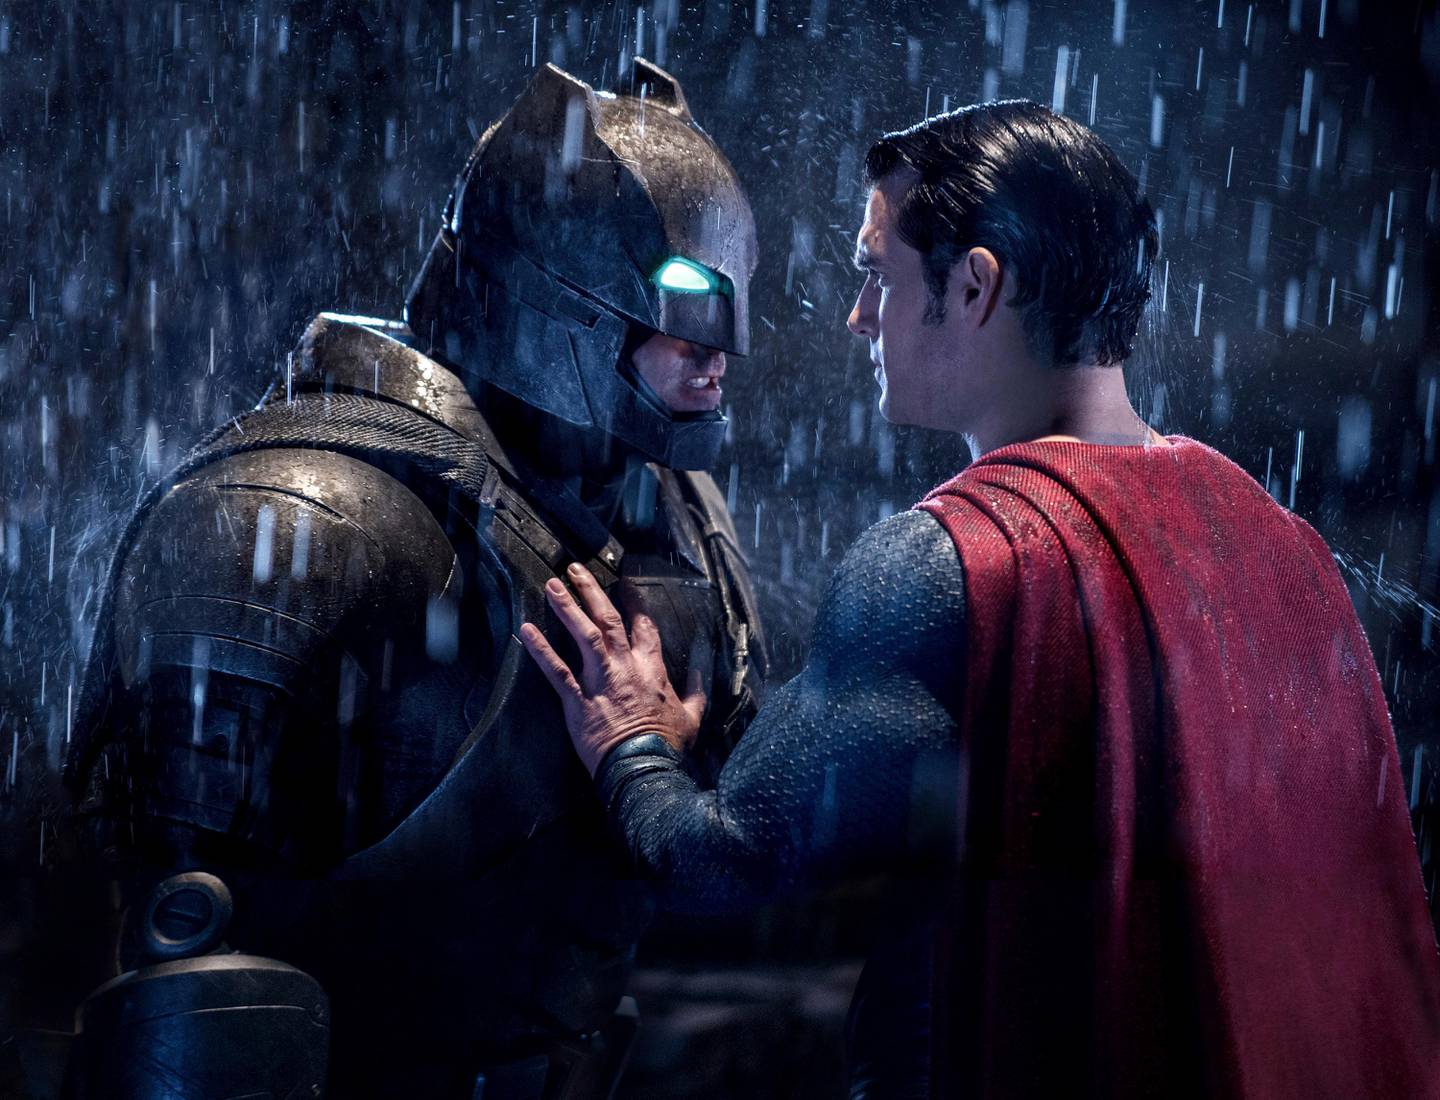 This image released by Warner Bros. Pictures shows Ben Affleck, left, and Henry Cavill in a scene from, "Batman v Superman: Dawn of Justice." The film received eight nominations for the 37th annual Razzie Awards, including one for worst worst picture. The awards will be announced on Feb. 25. (Clay Enos/Warner Bros. Pictures via AP)